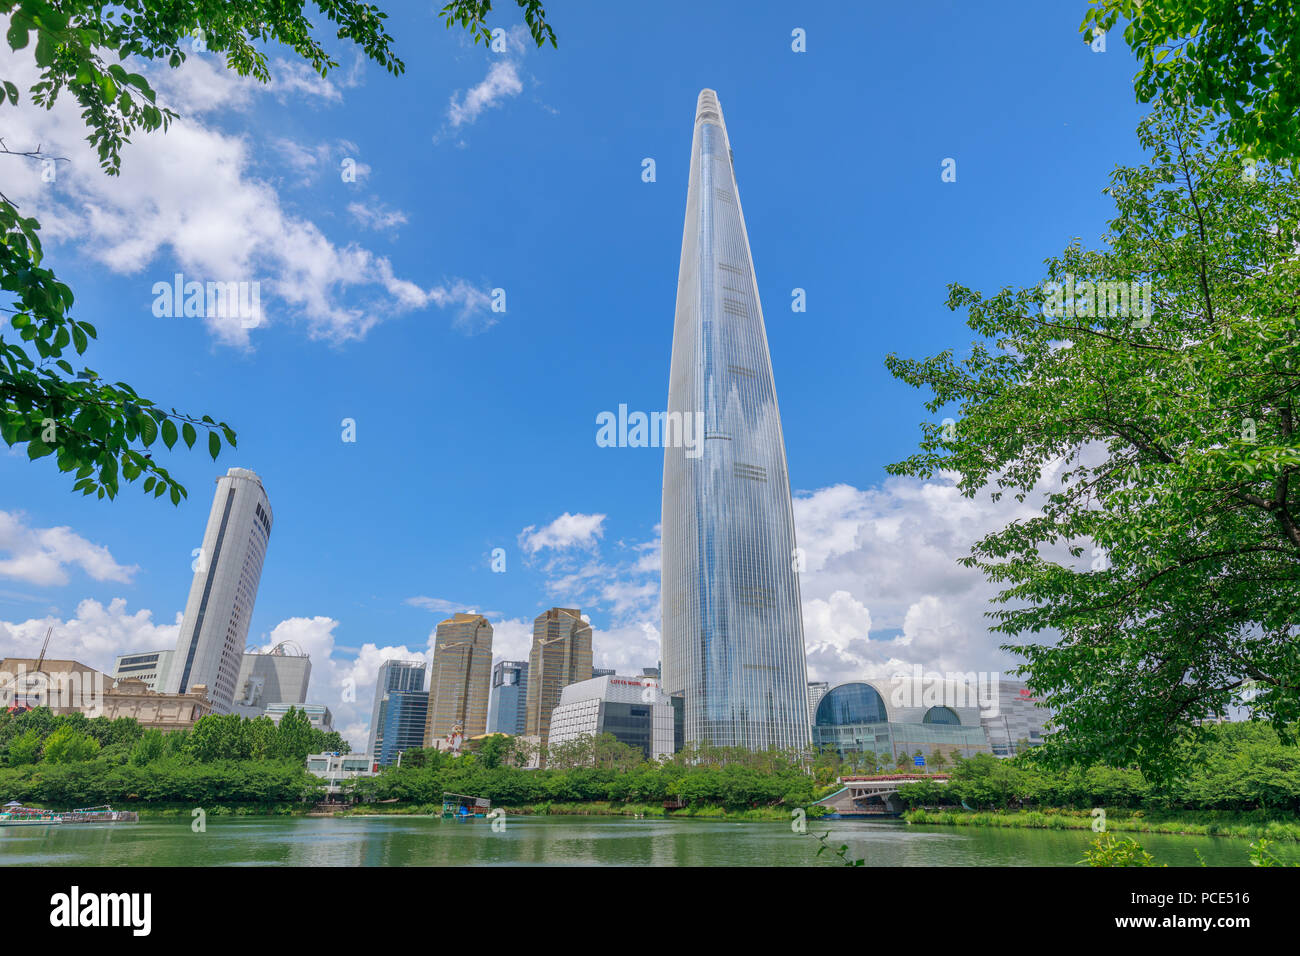 Seoul, South Korea - July 3, 2018 : Lotte World Tower and cityscape with clear blue sky in Jamsil, Songpa-gu, Seoul city Stock Photo